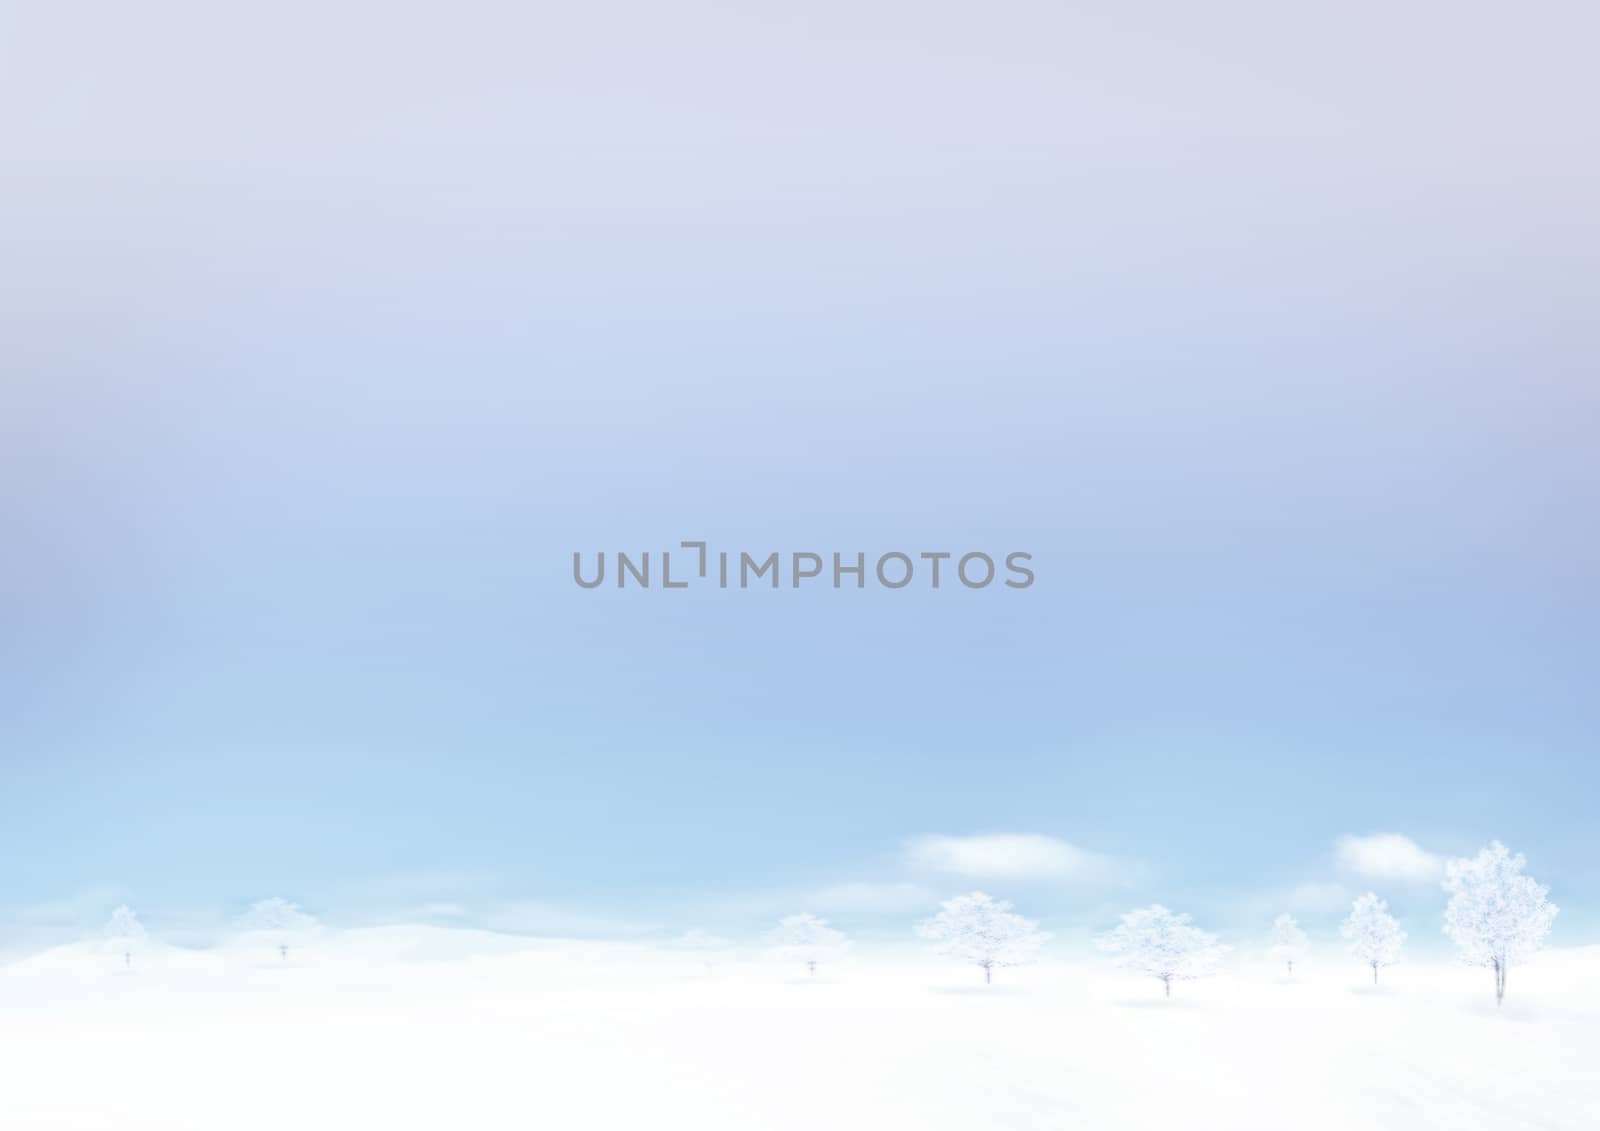 The gradient blue sky and snow floor  in winter horizontal paper background with some trees